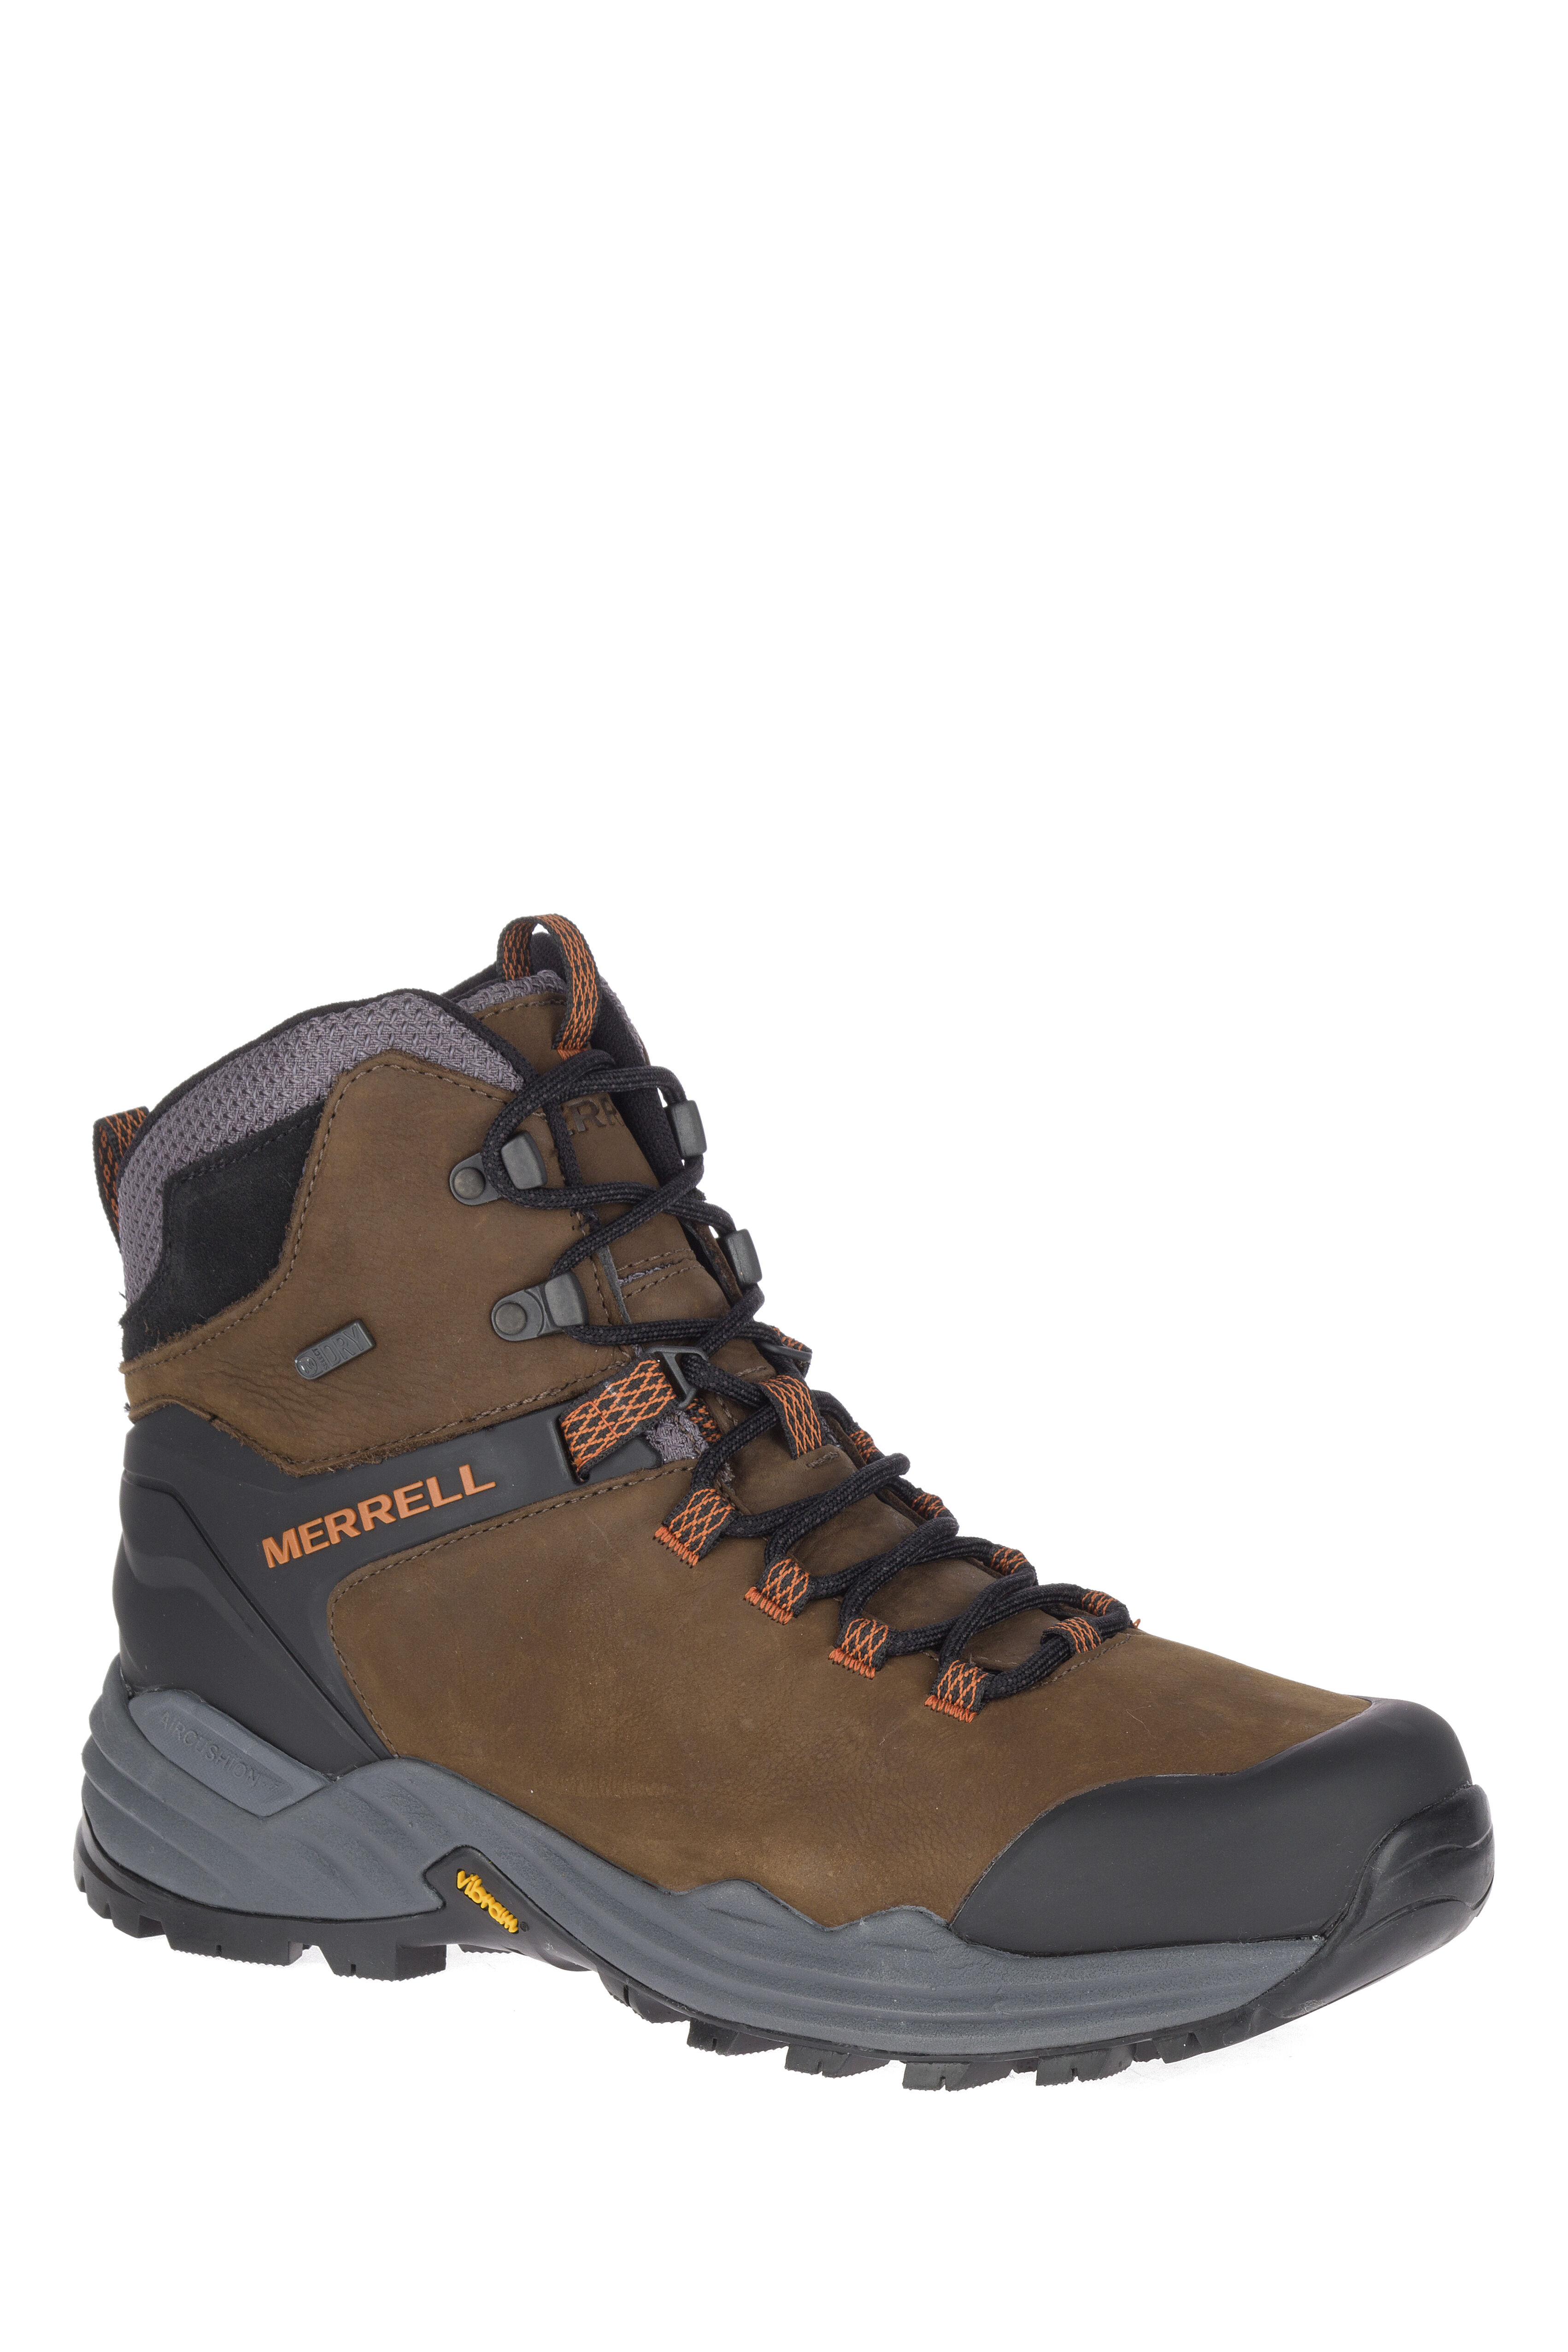 Merrell Phaserbound 2 Tall WP Hiking 